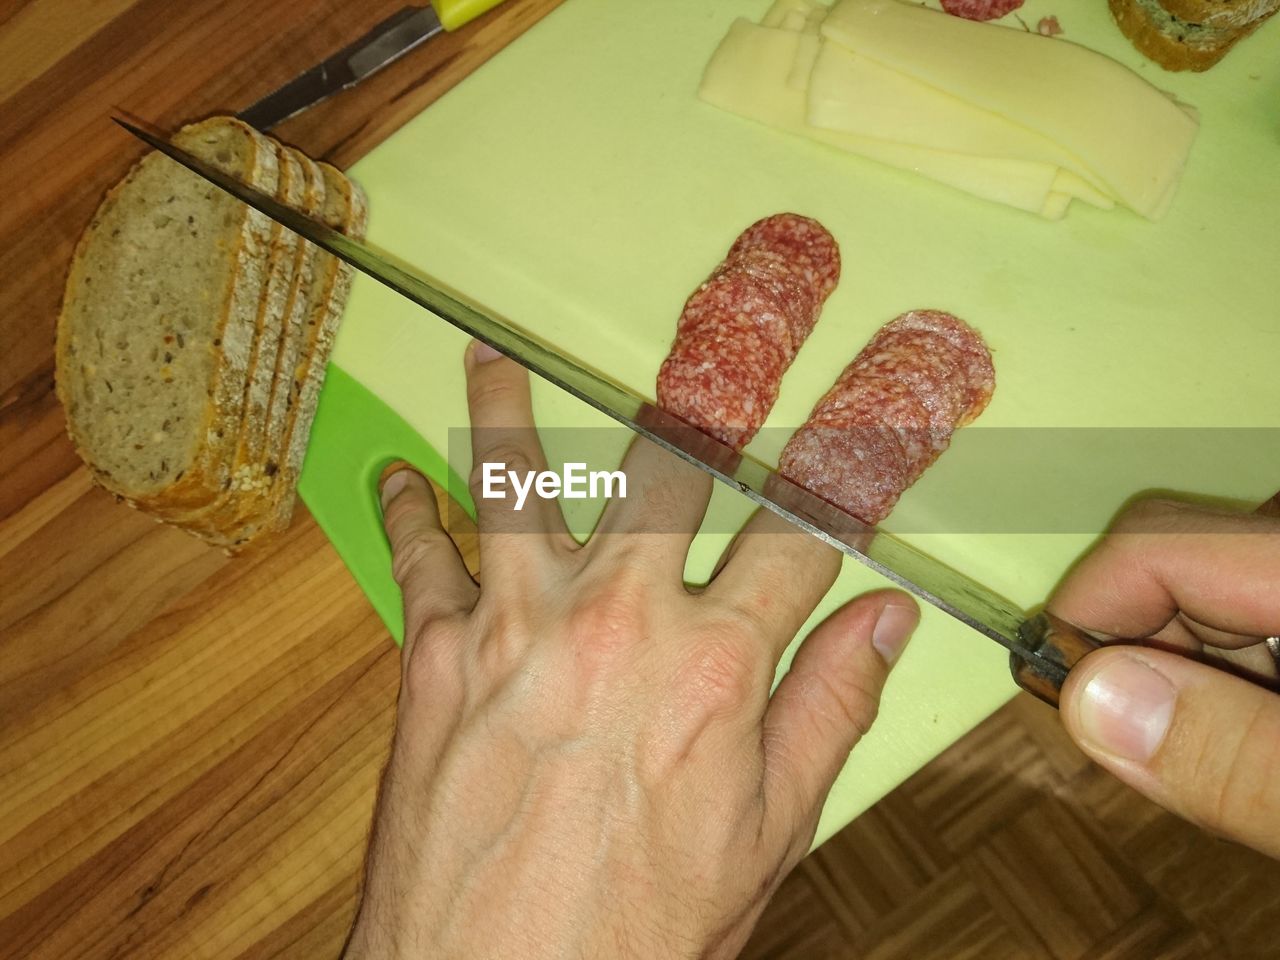 Optical illusion of cropped hand chopping sausage fingers on cutting board